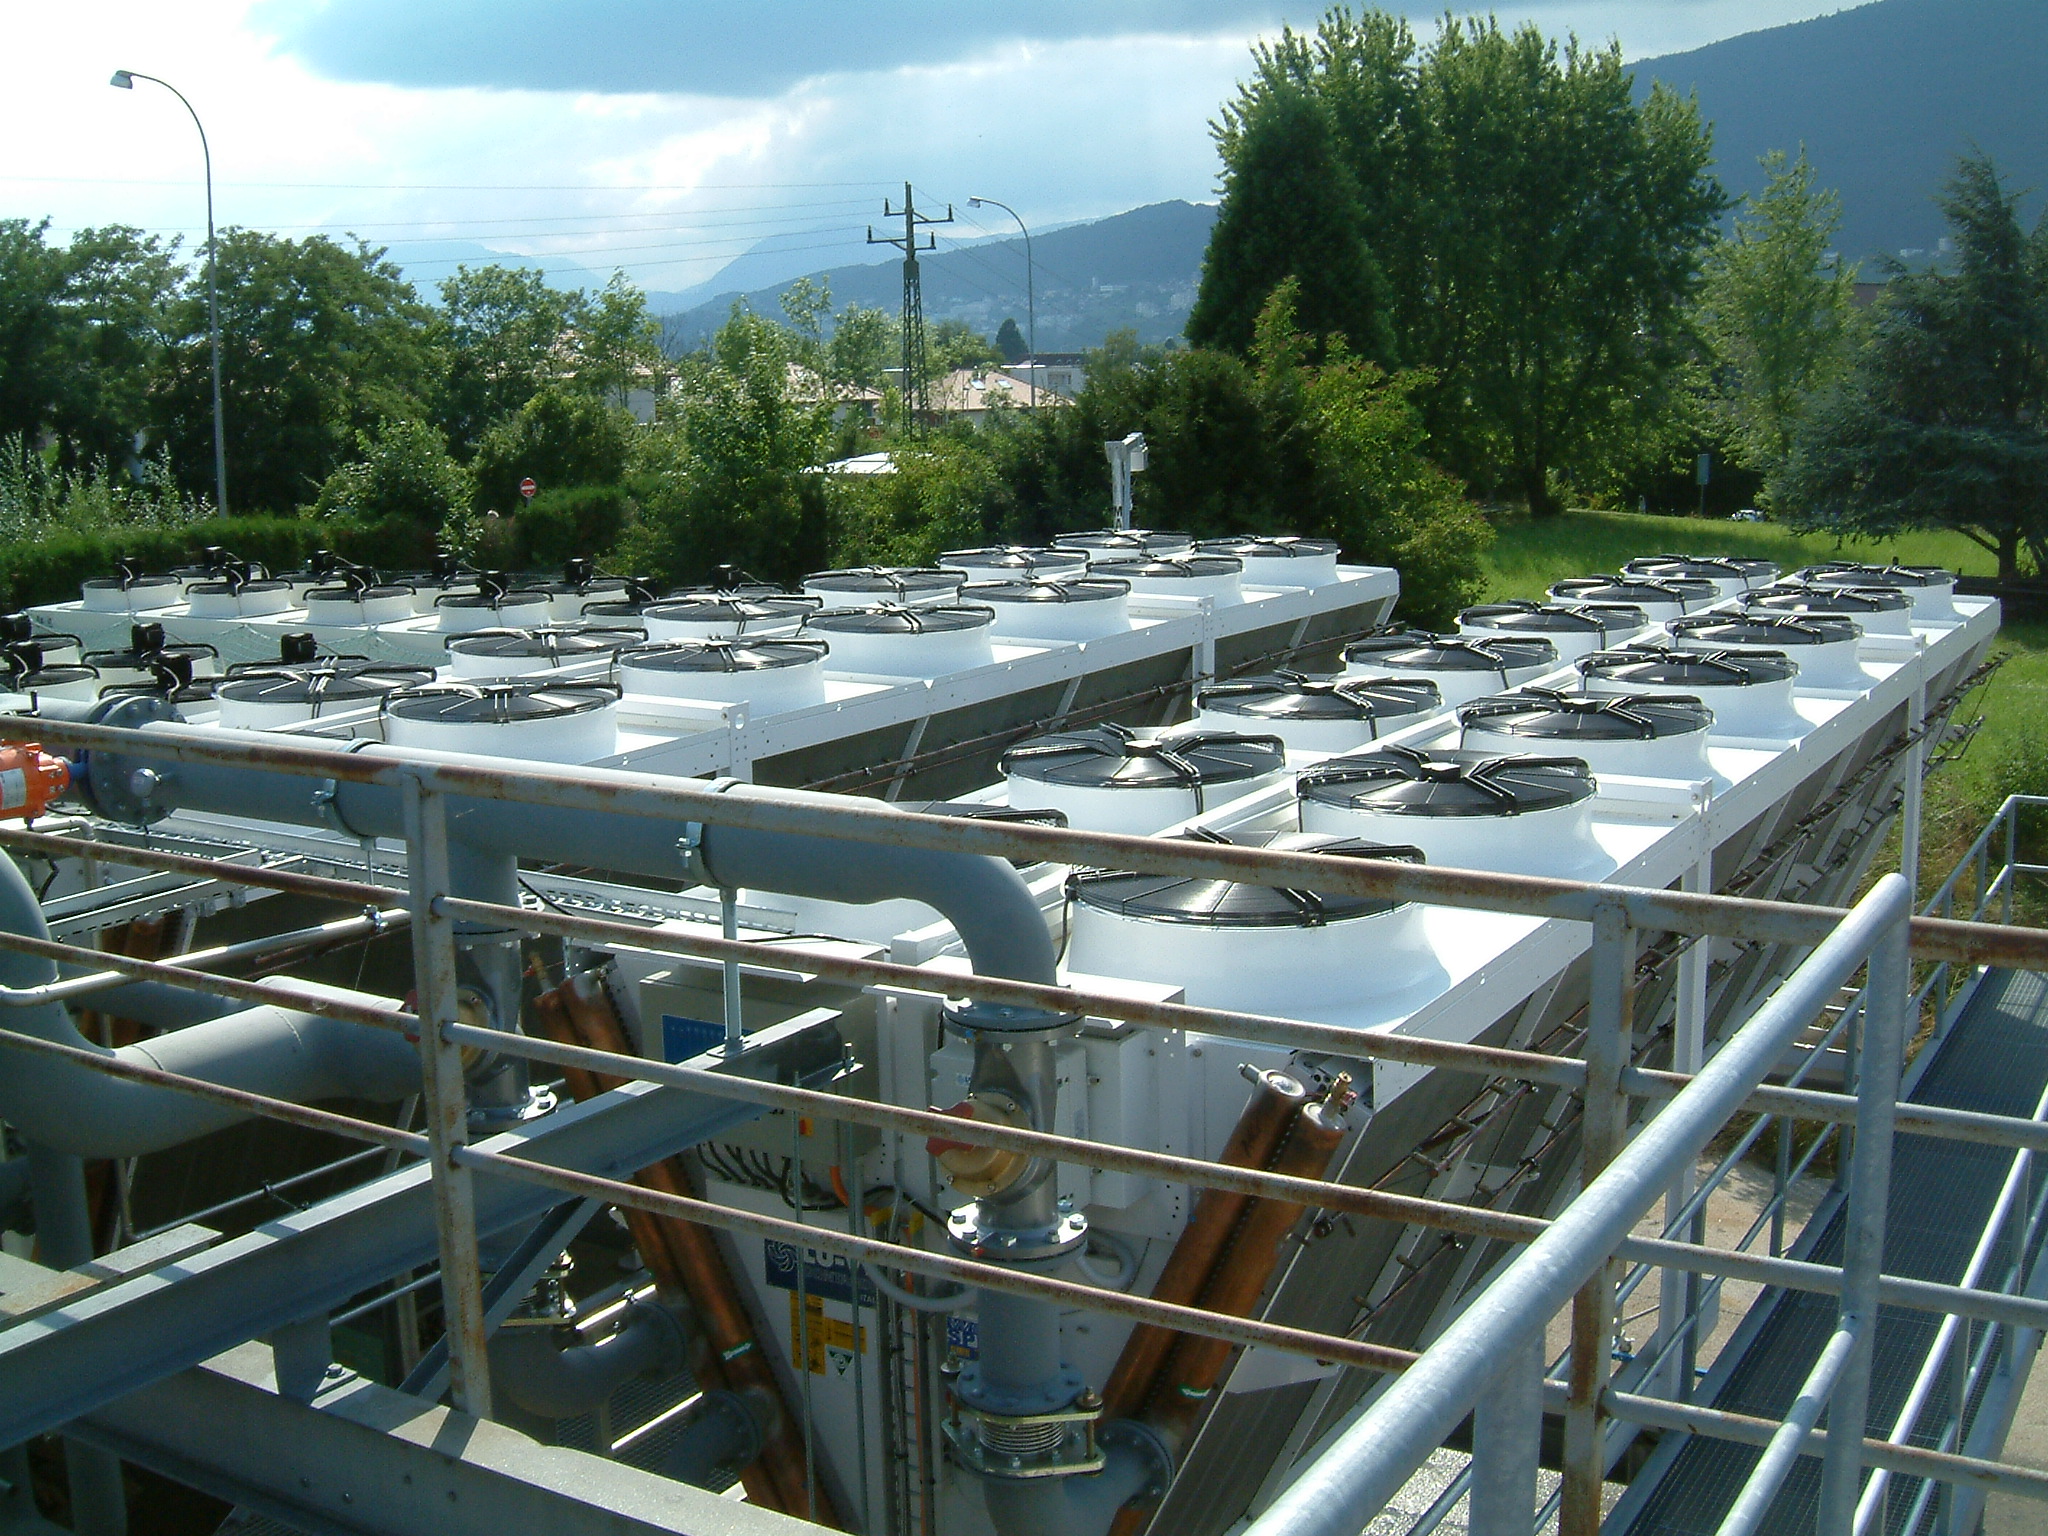 EM MICROELECTRONICS (SWATCH Group) - Marin, Neuchatel Lake, Switzerland -  
Cooling for electronic components and air conditioning - 2 EHLD1X 6277 Dry & Spray with water treatment system - 850 KW each unit -  